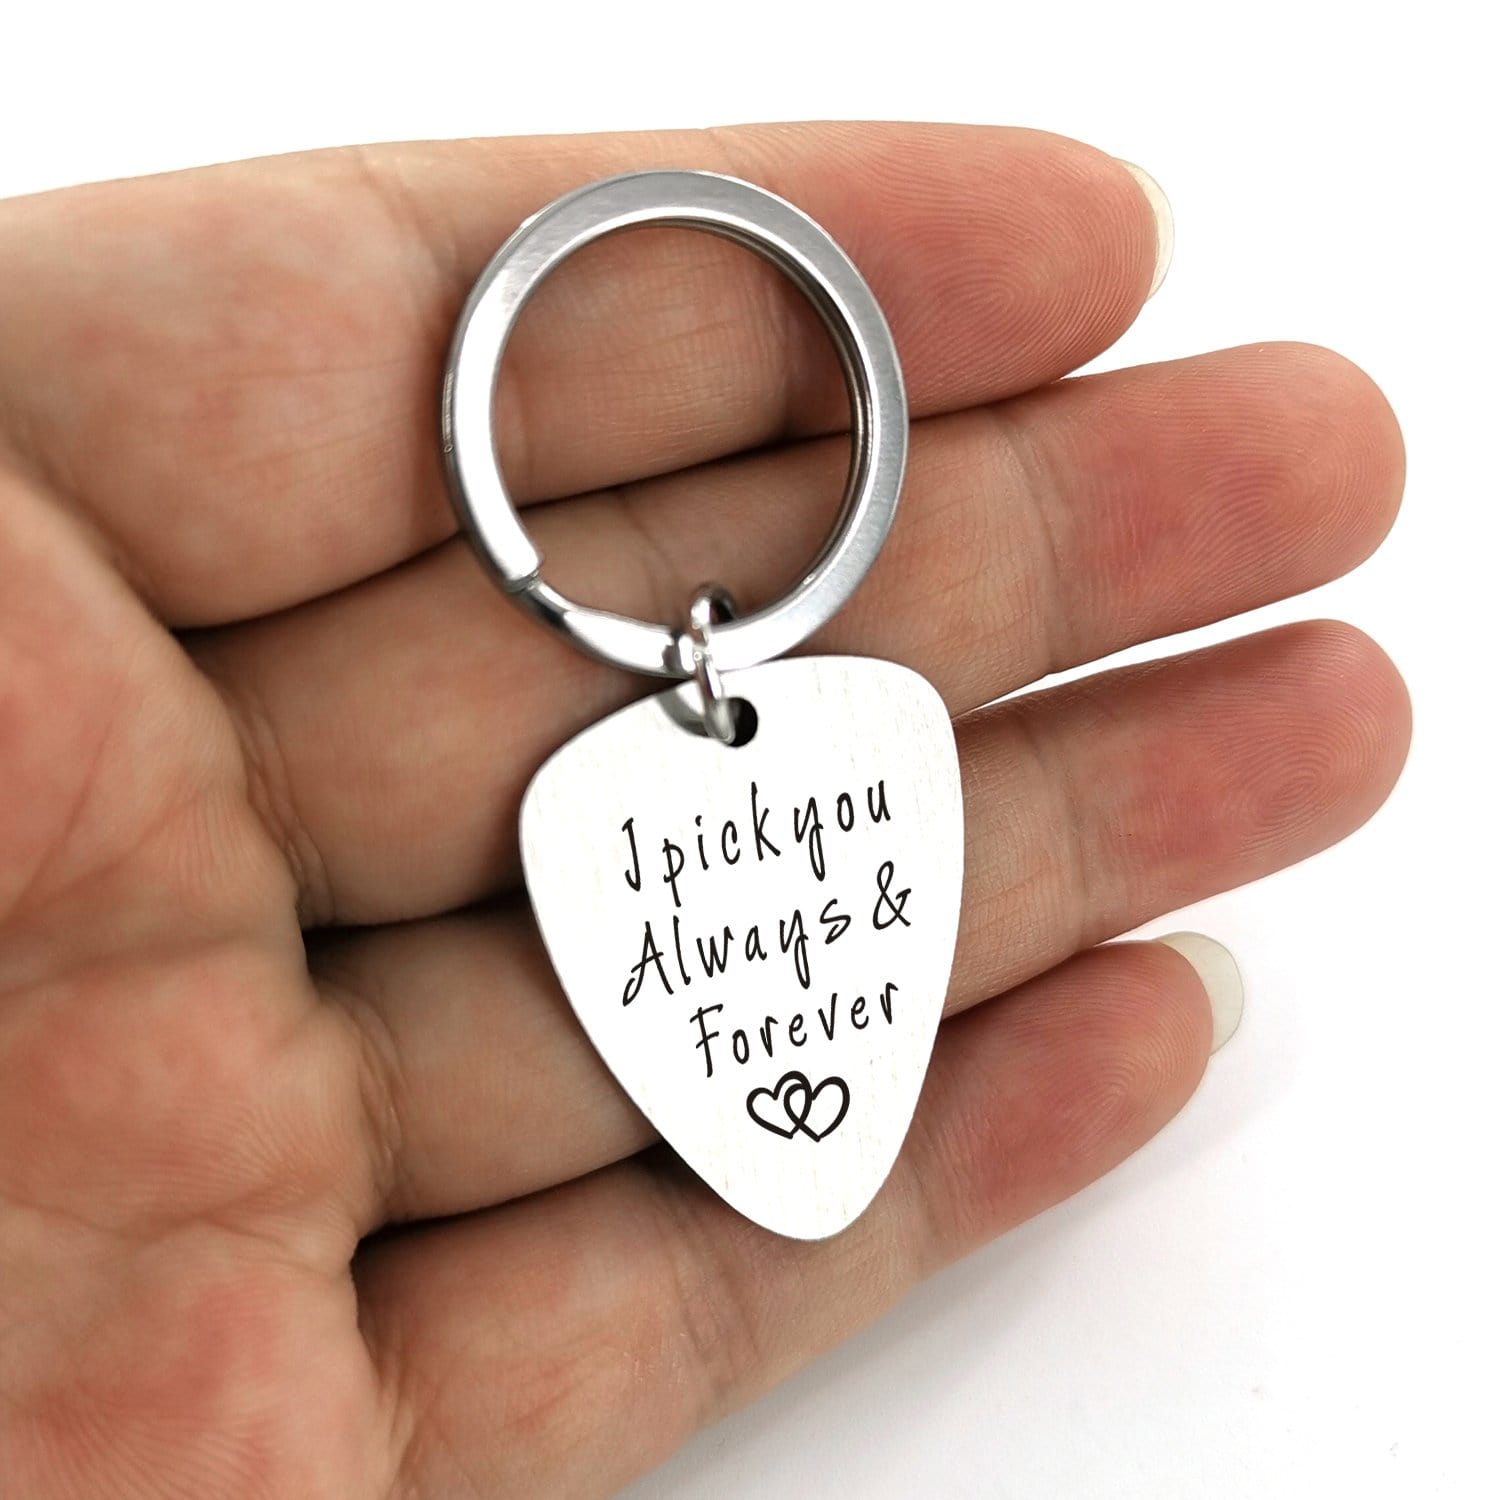 Guitar Pick Keychains I Pick You Always And Forever - Customized Guitar Pick Keychain GiveMe-Gifts